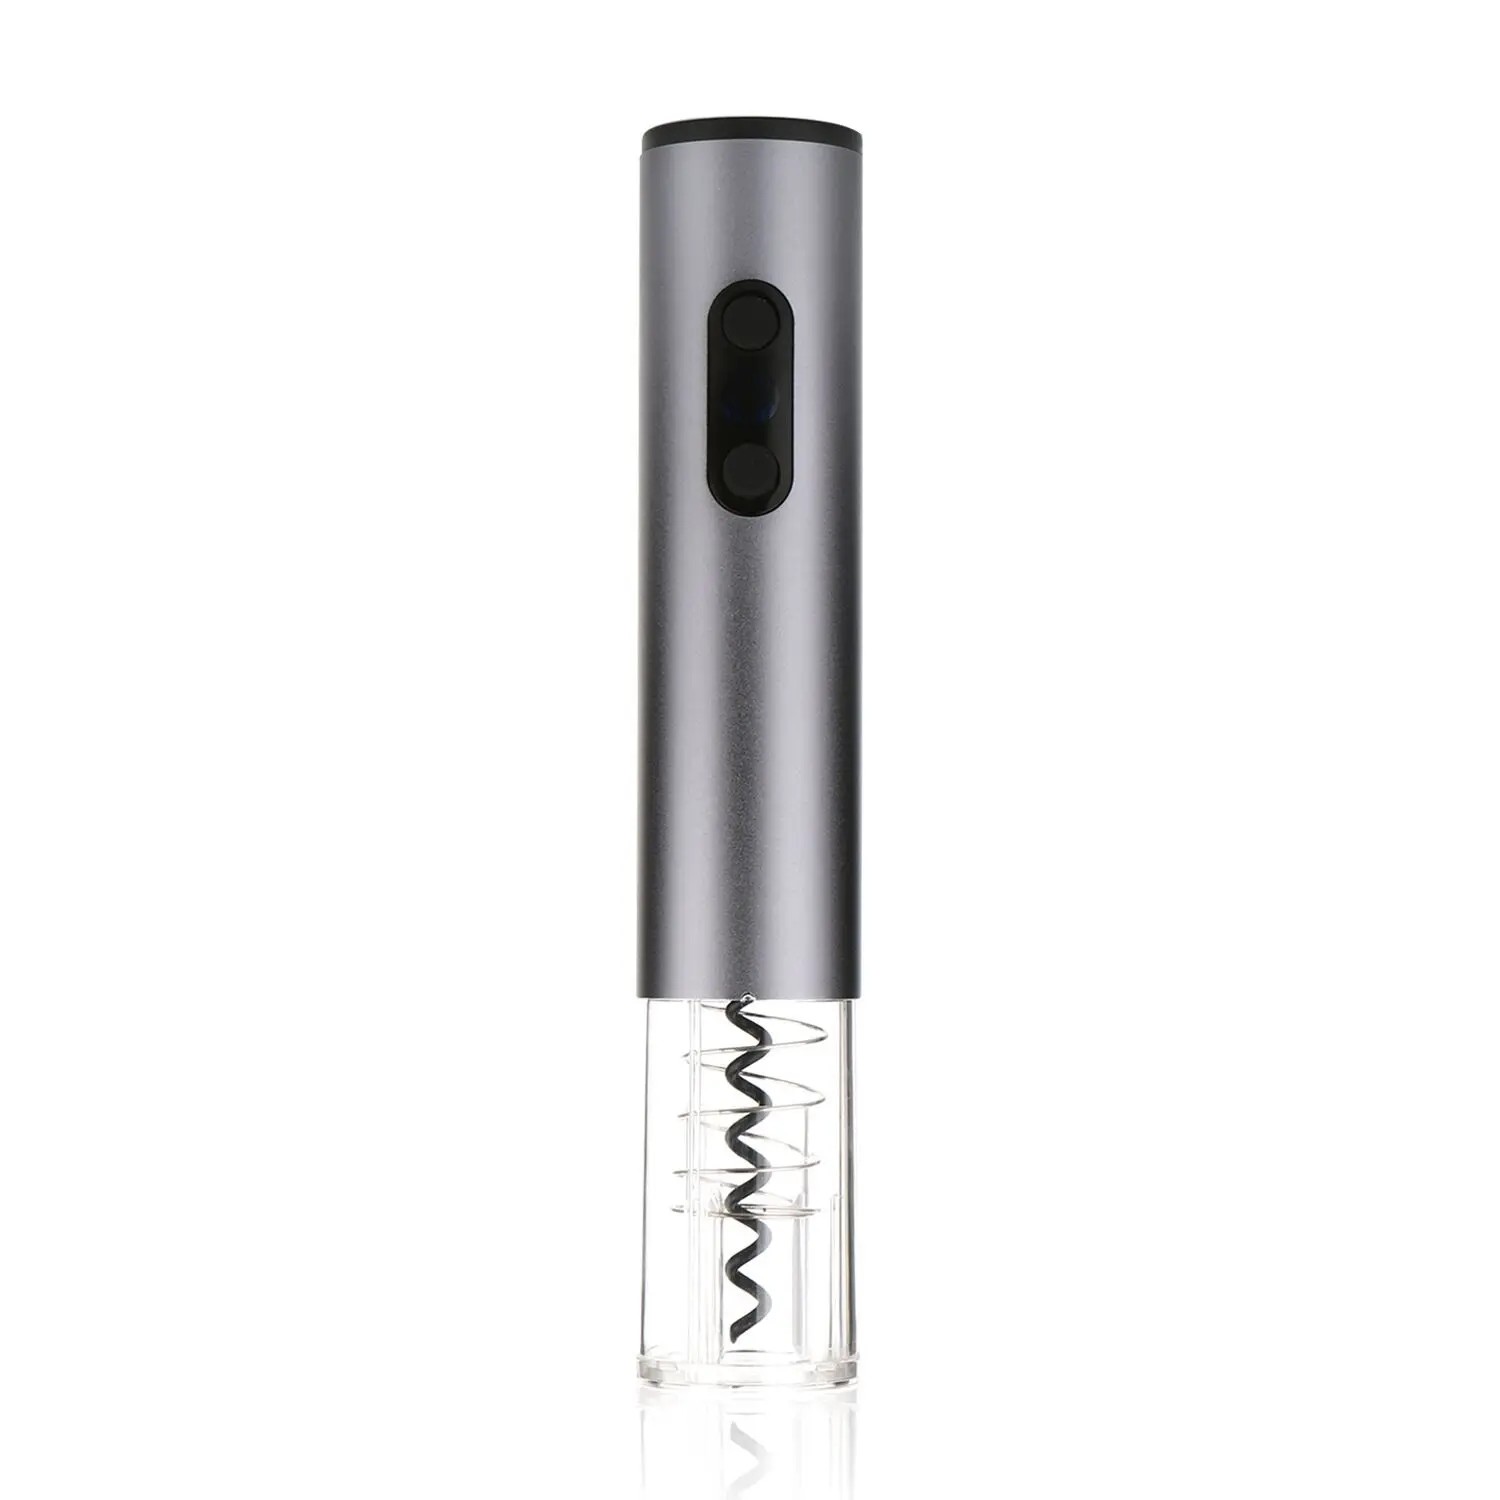 

Wireless Wine Opener, Automatic Corkscrew Set Contains Foil Cutter, Vacuum Stopper Electronic Wine Opener